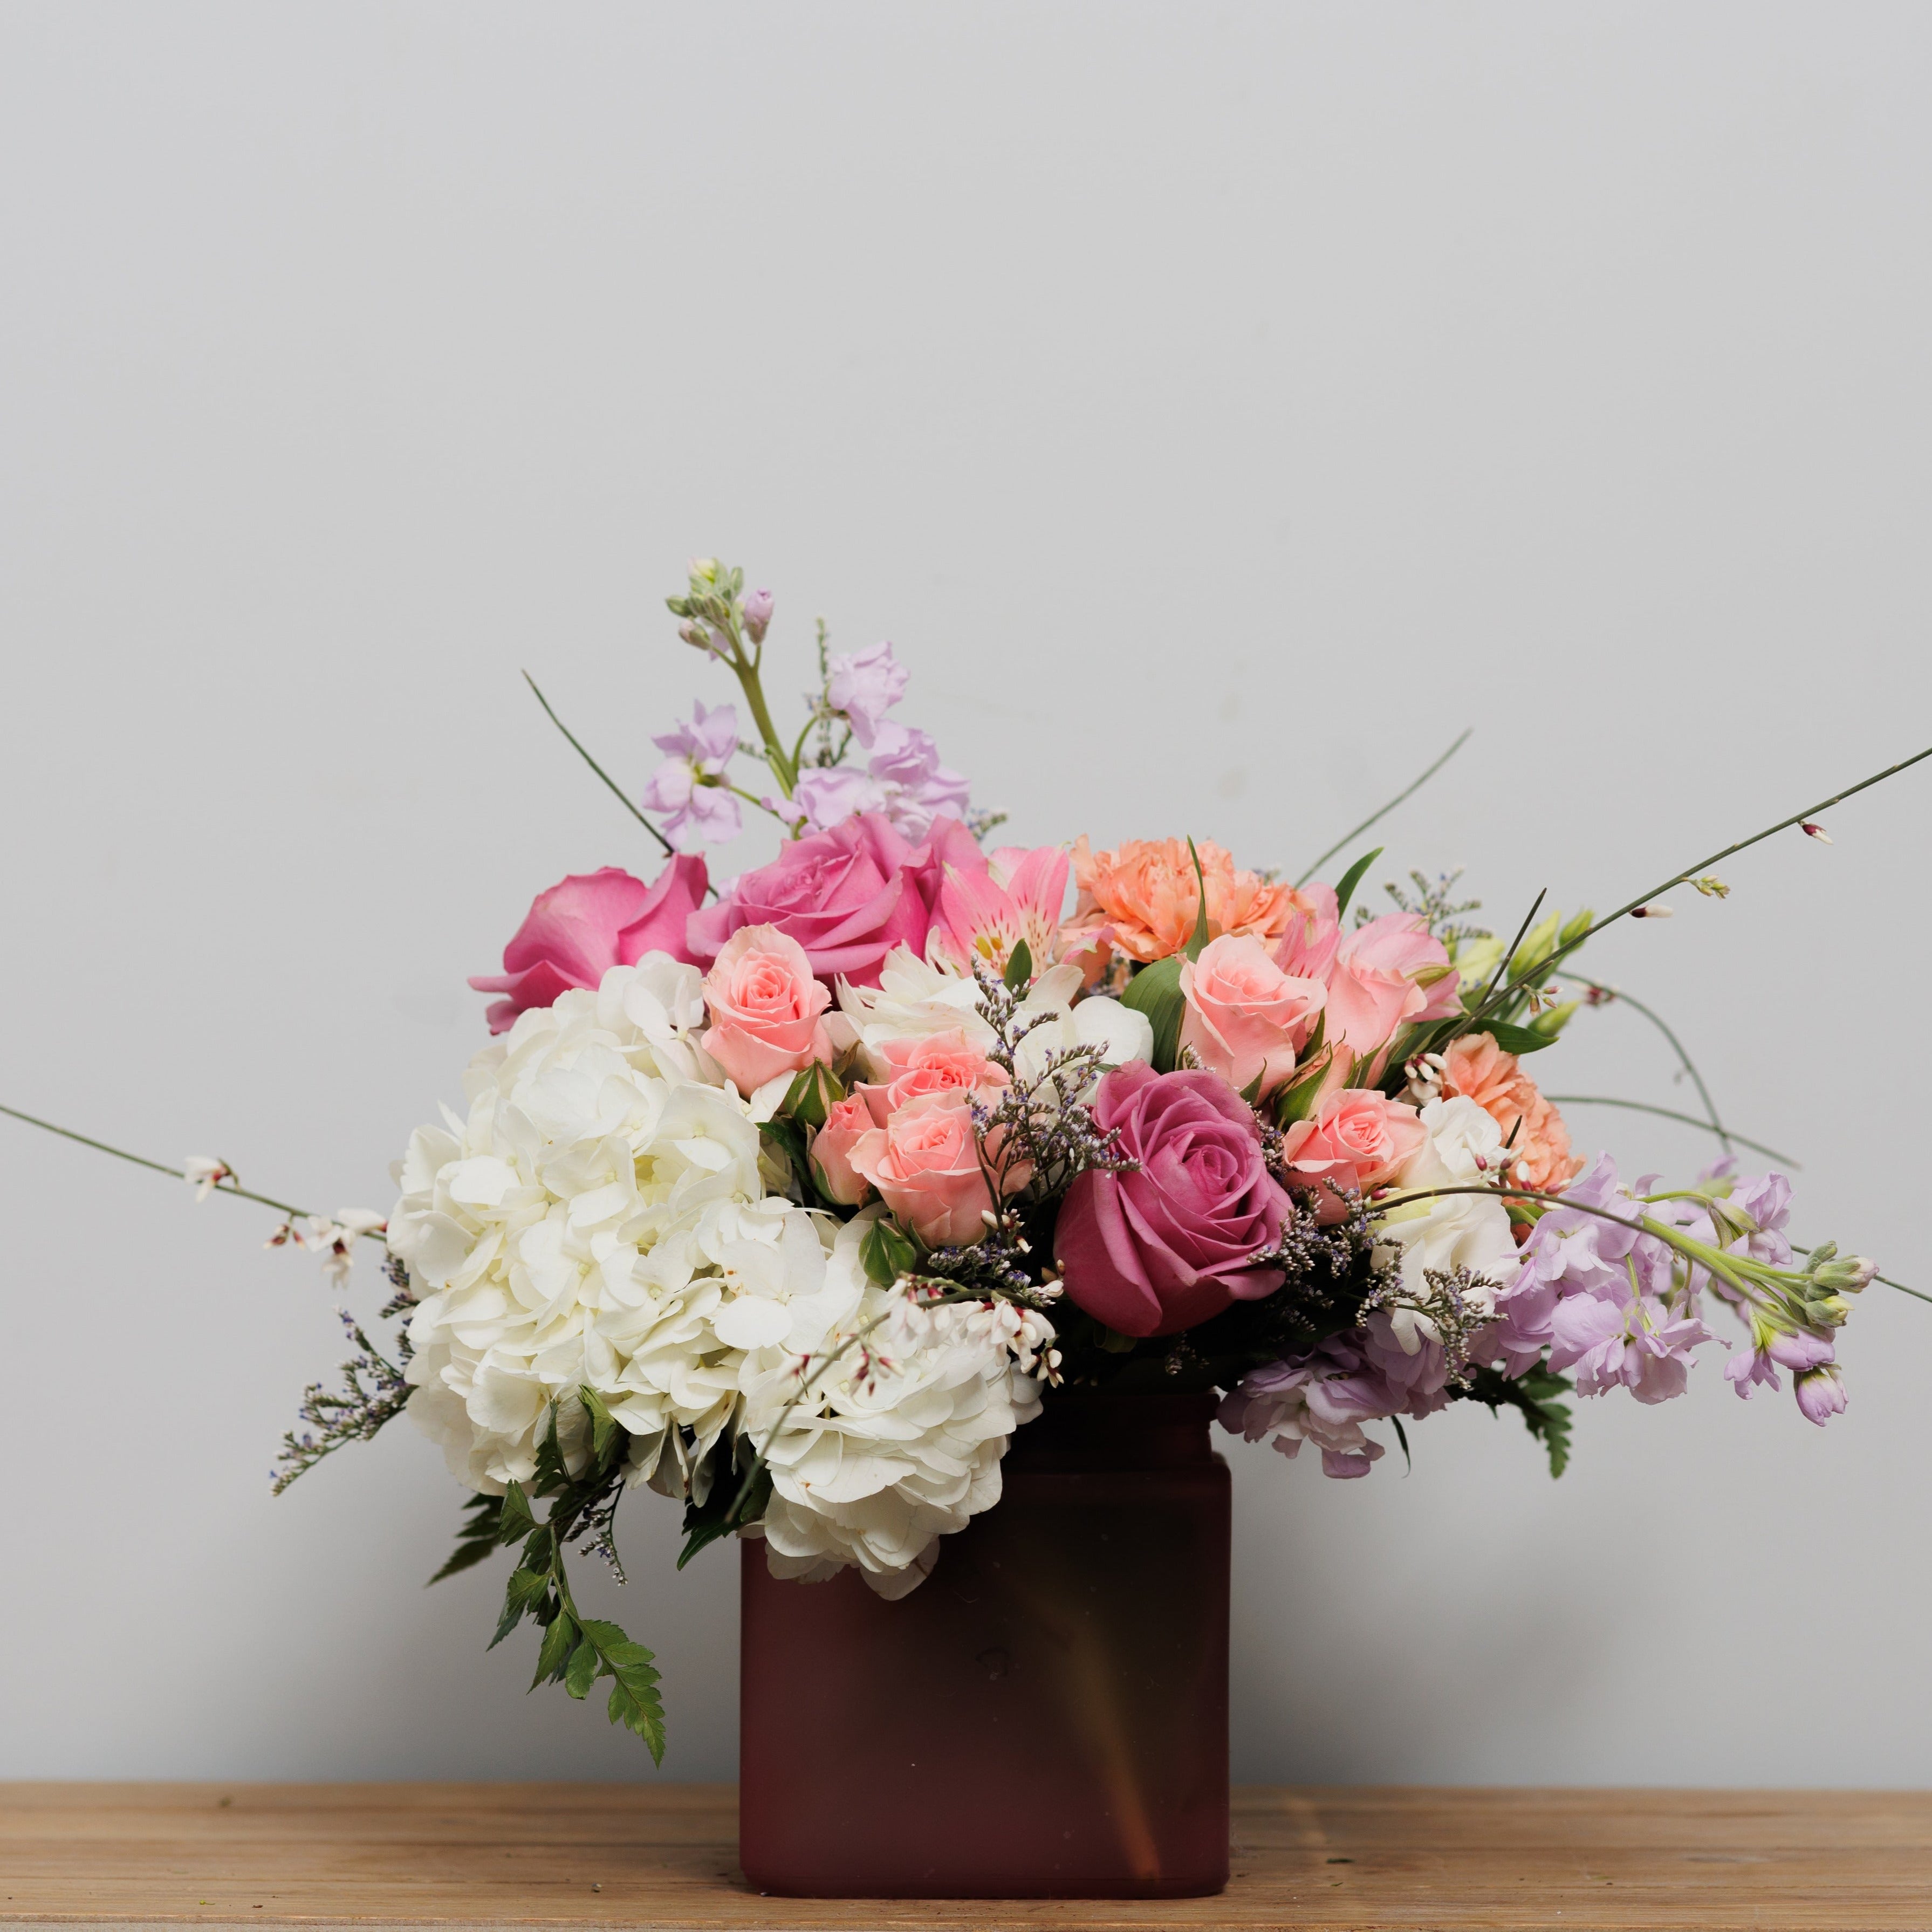 A cube arrangement with pink and white flowrers.